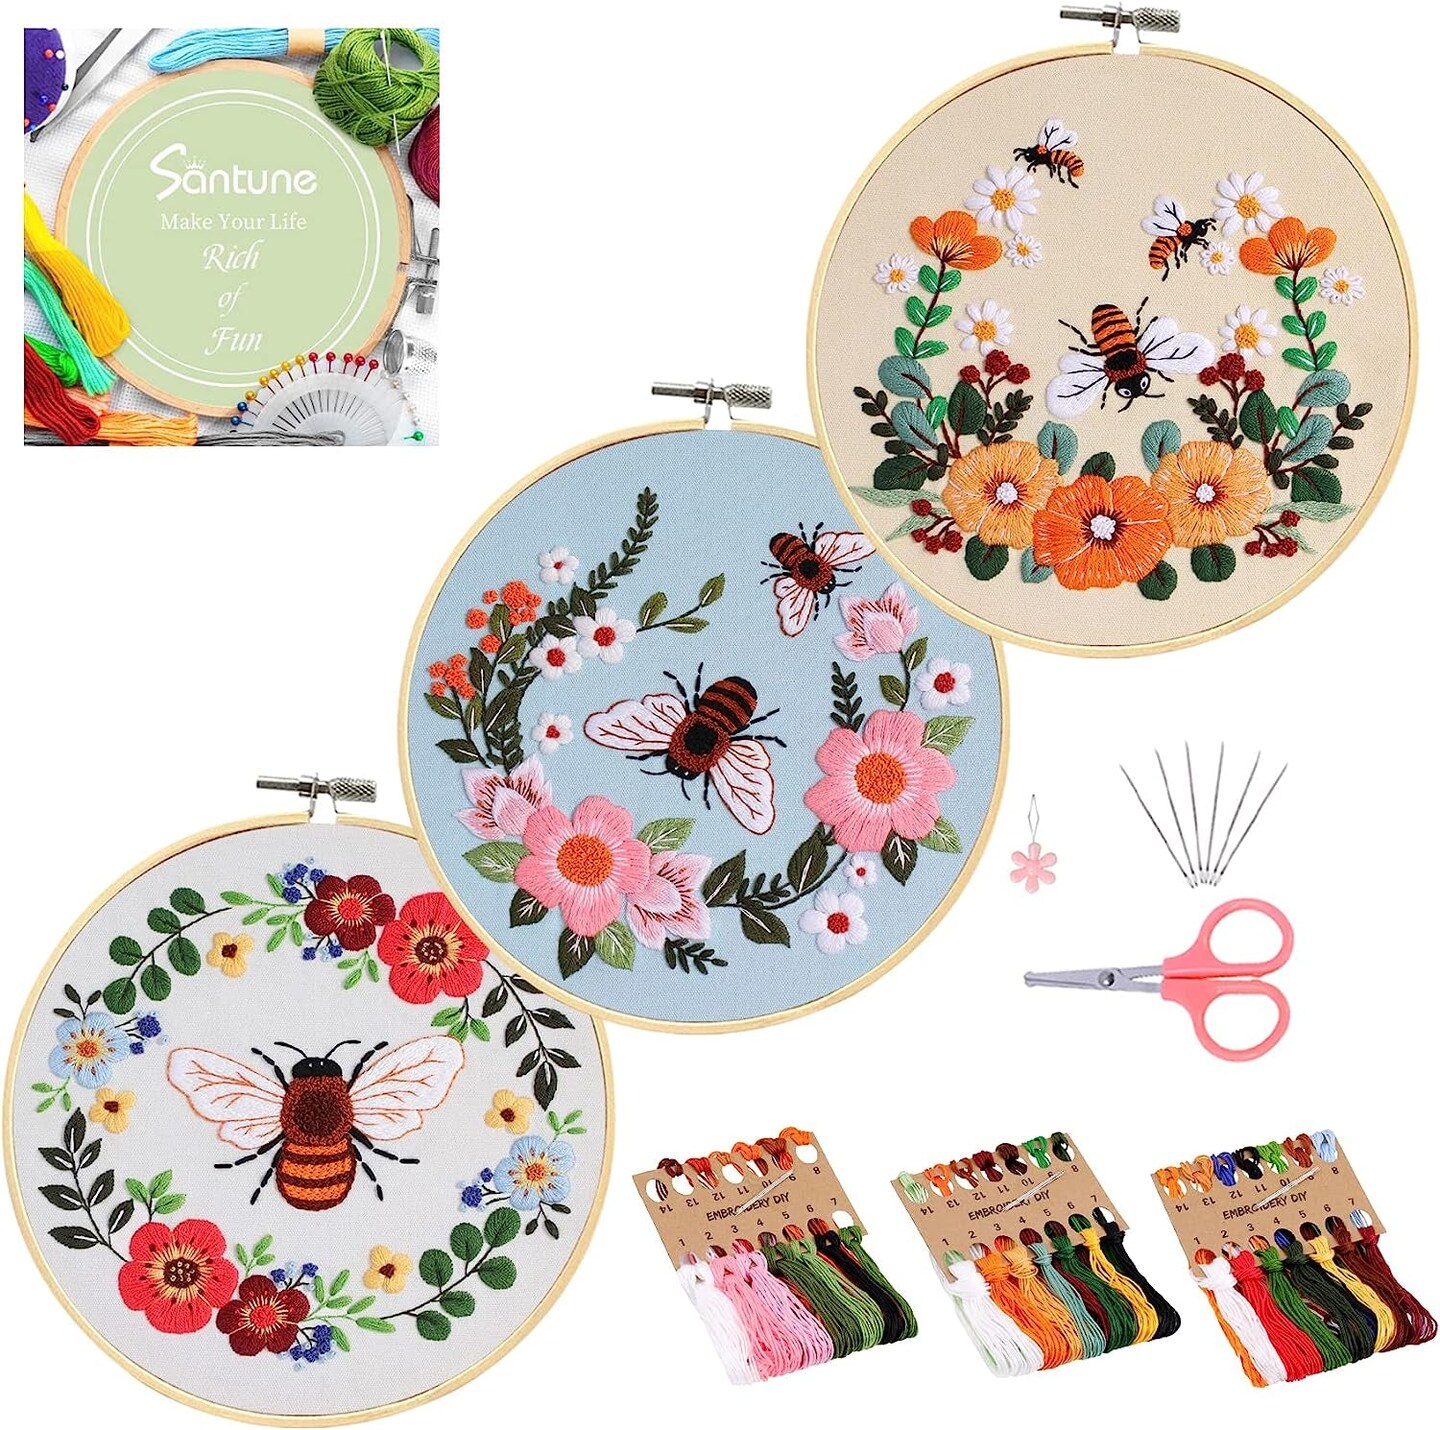 5 Set Embroidery Kit Easy To Install For Beginners Embroidery